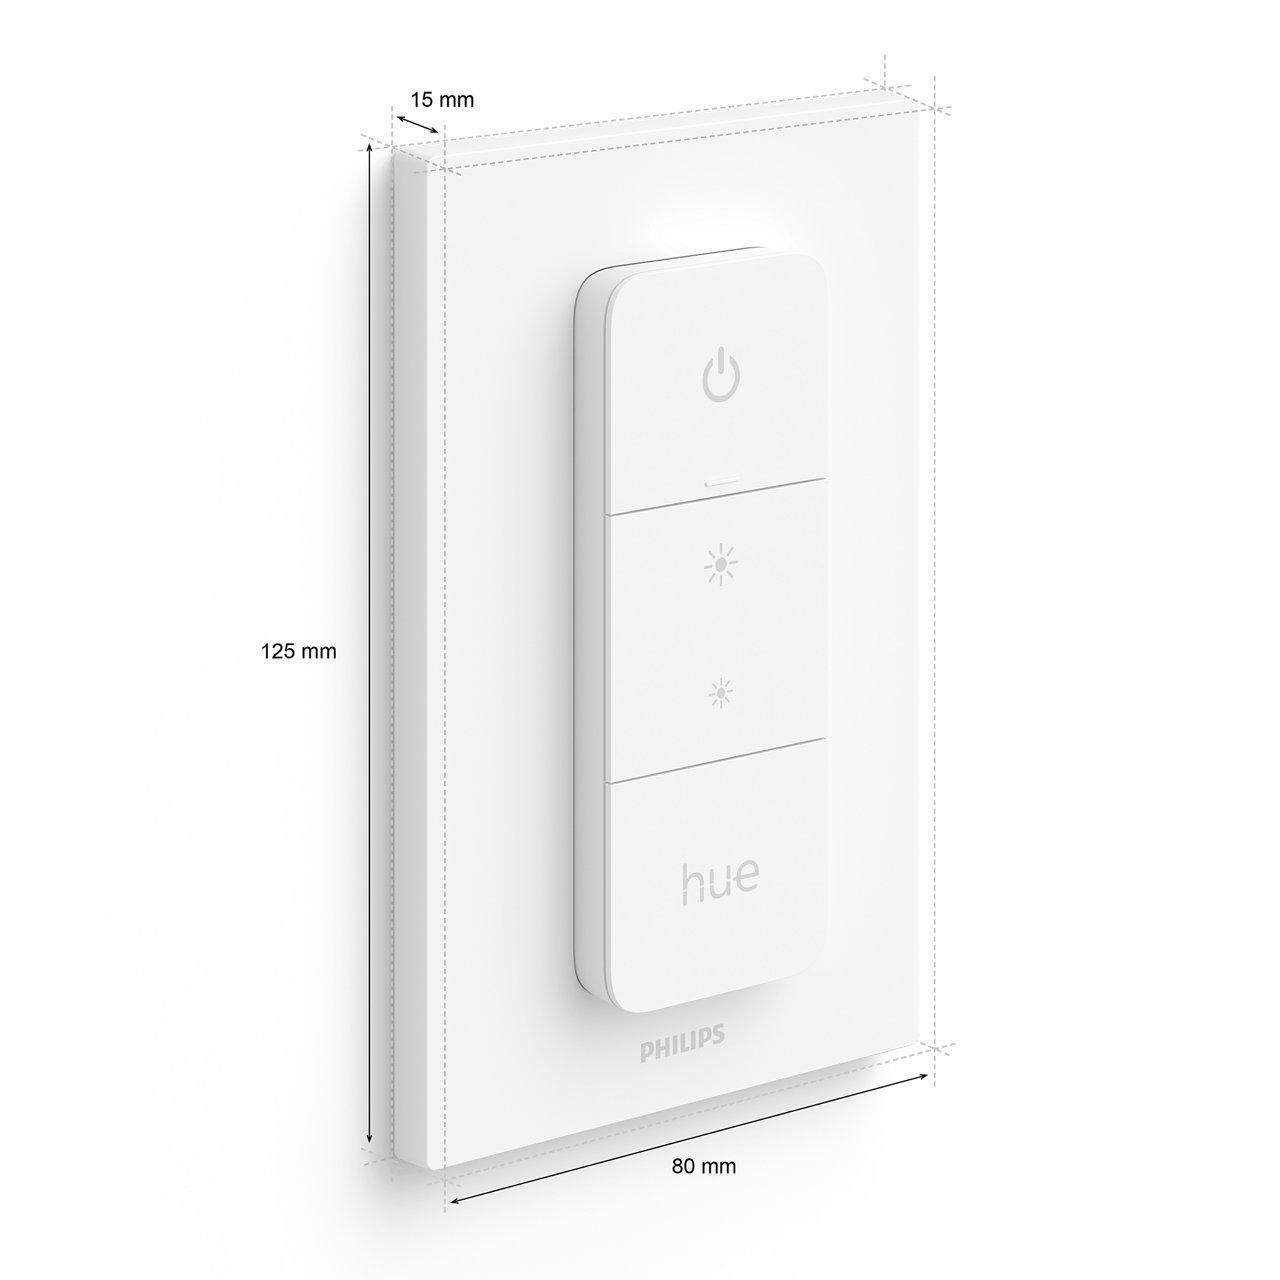 PHILIPS HUE DIMMER SWITCH WIFI BATTERY OPERATED WHITE 929002398602 27461700